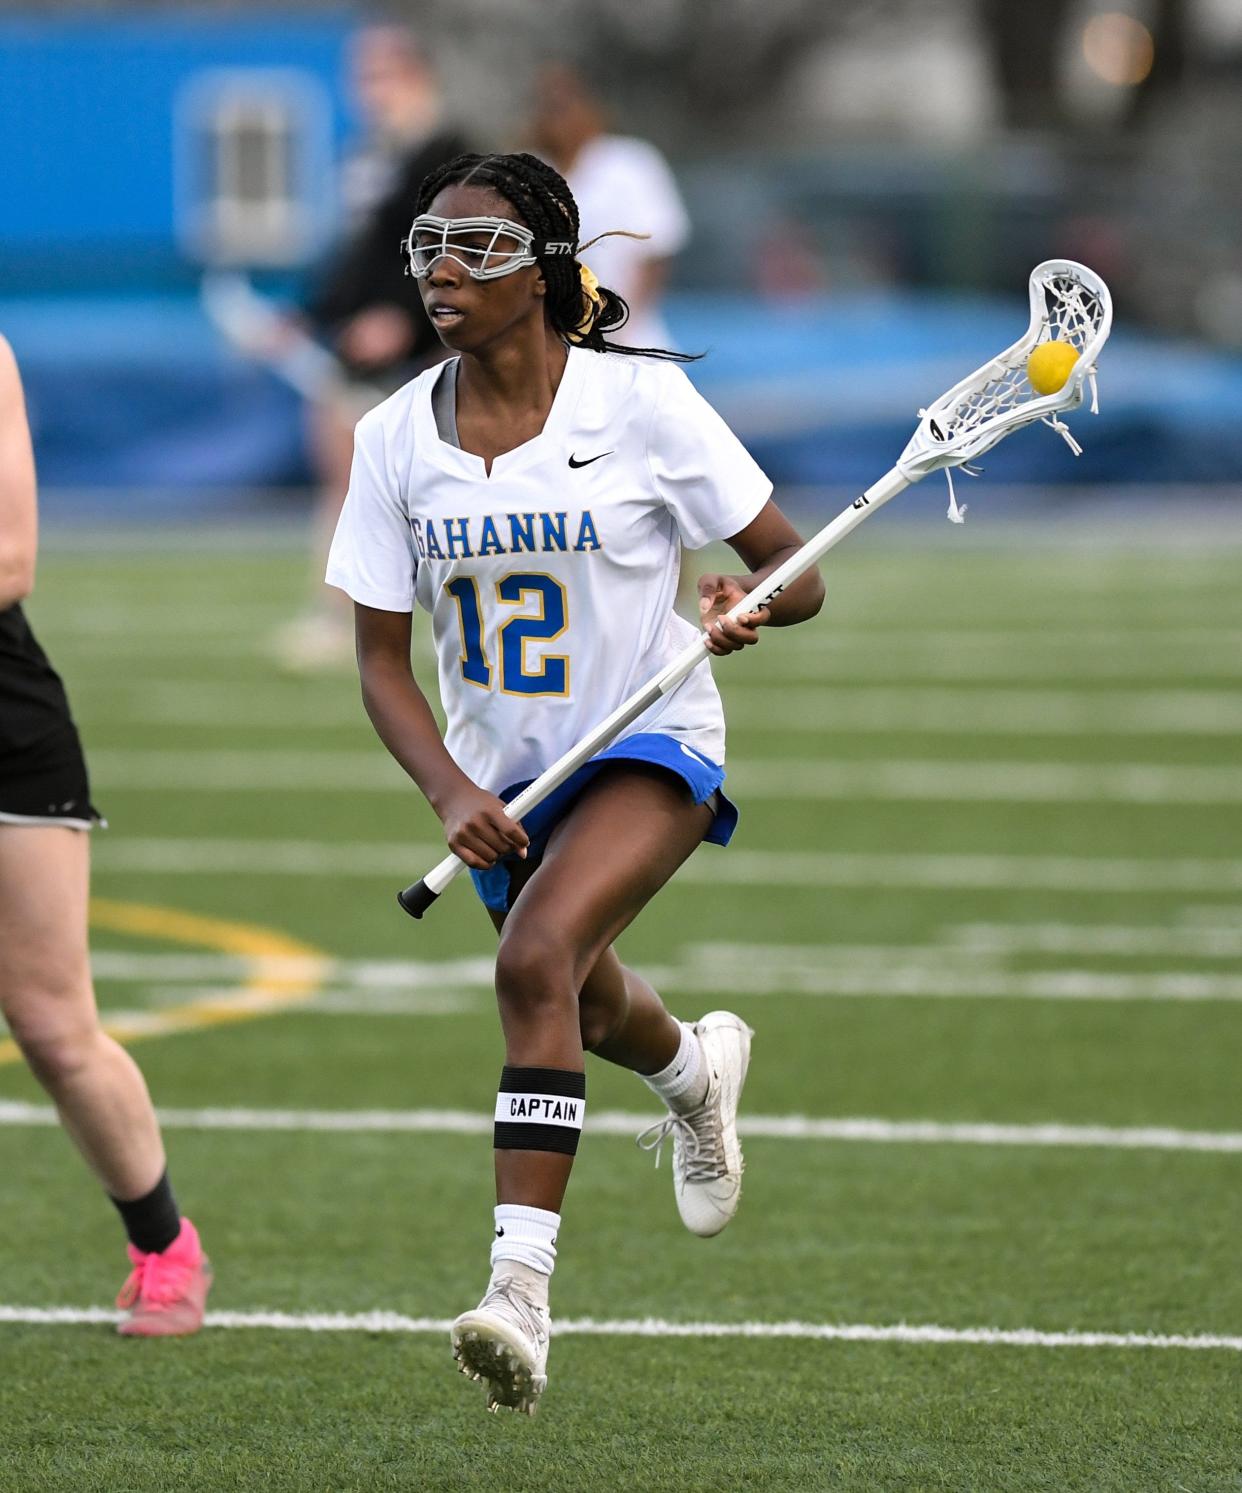 Senior Kendall Barker was one of the top contributors for Gahanna Lincoln, which earned its first postseason win since 2016 and finished 9-9. Barker had 46 goals and 11 assists this season.